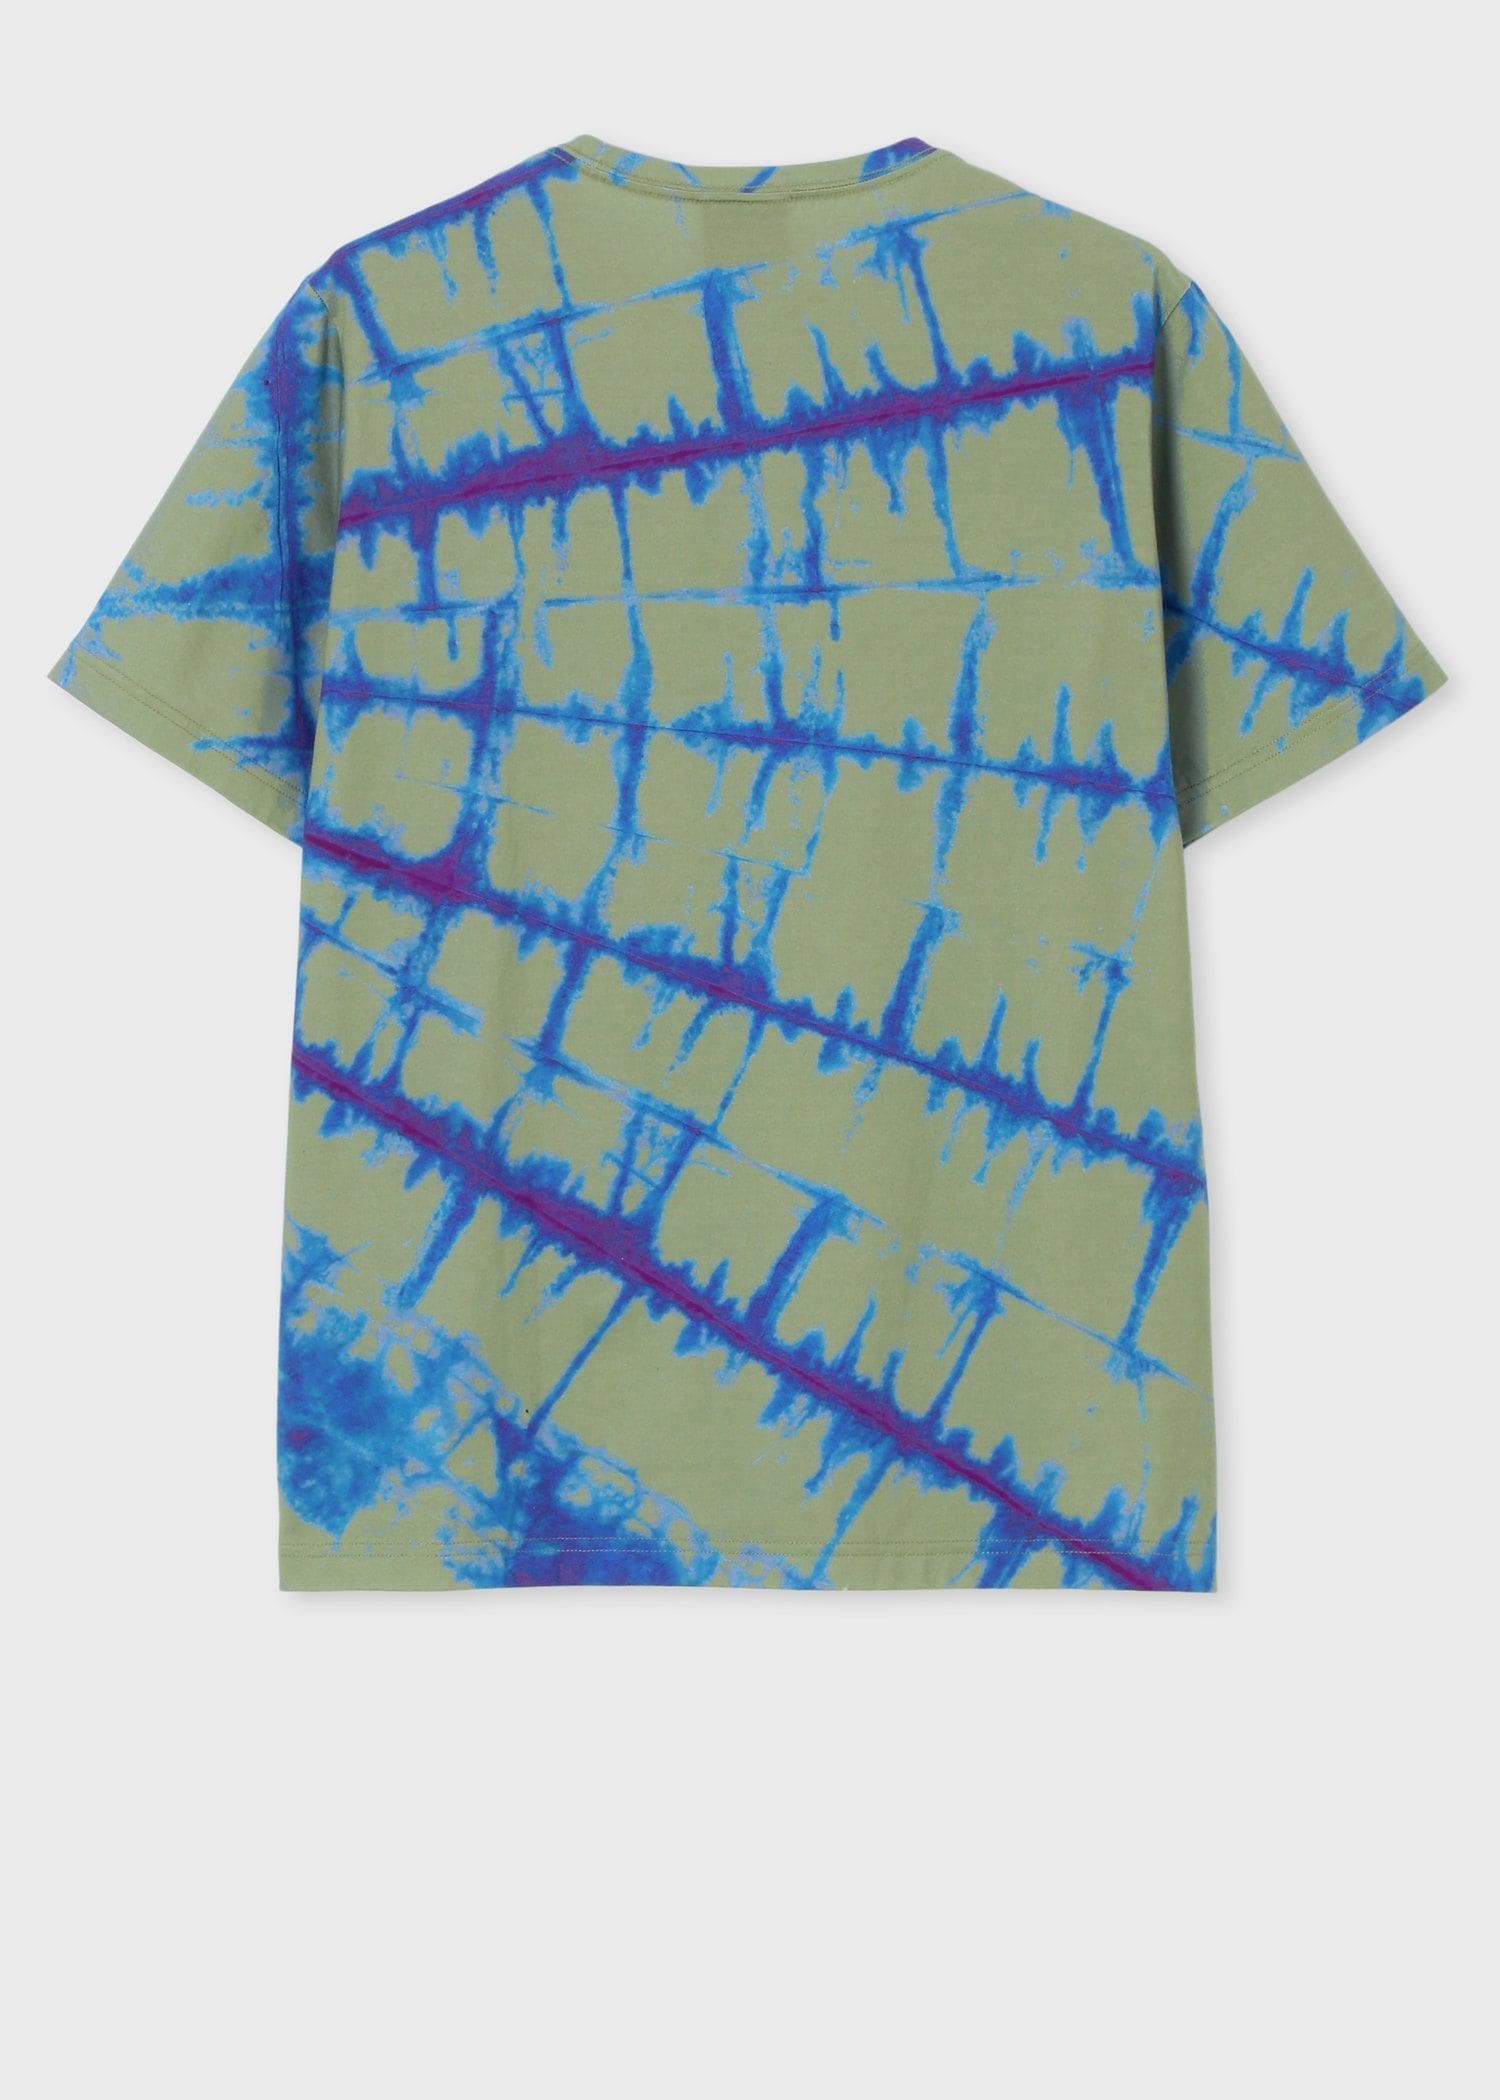 "Frequency" Tシャツ